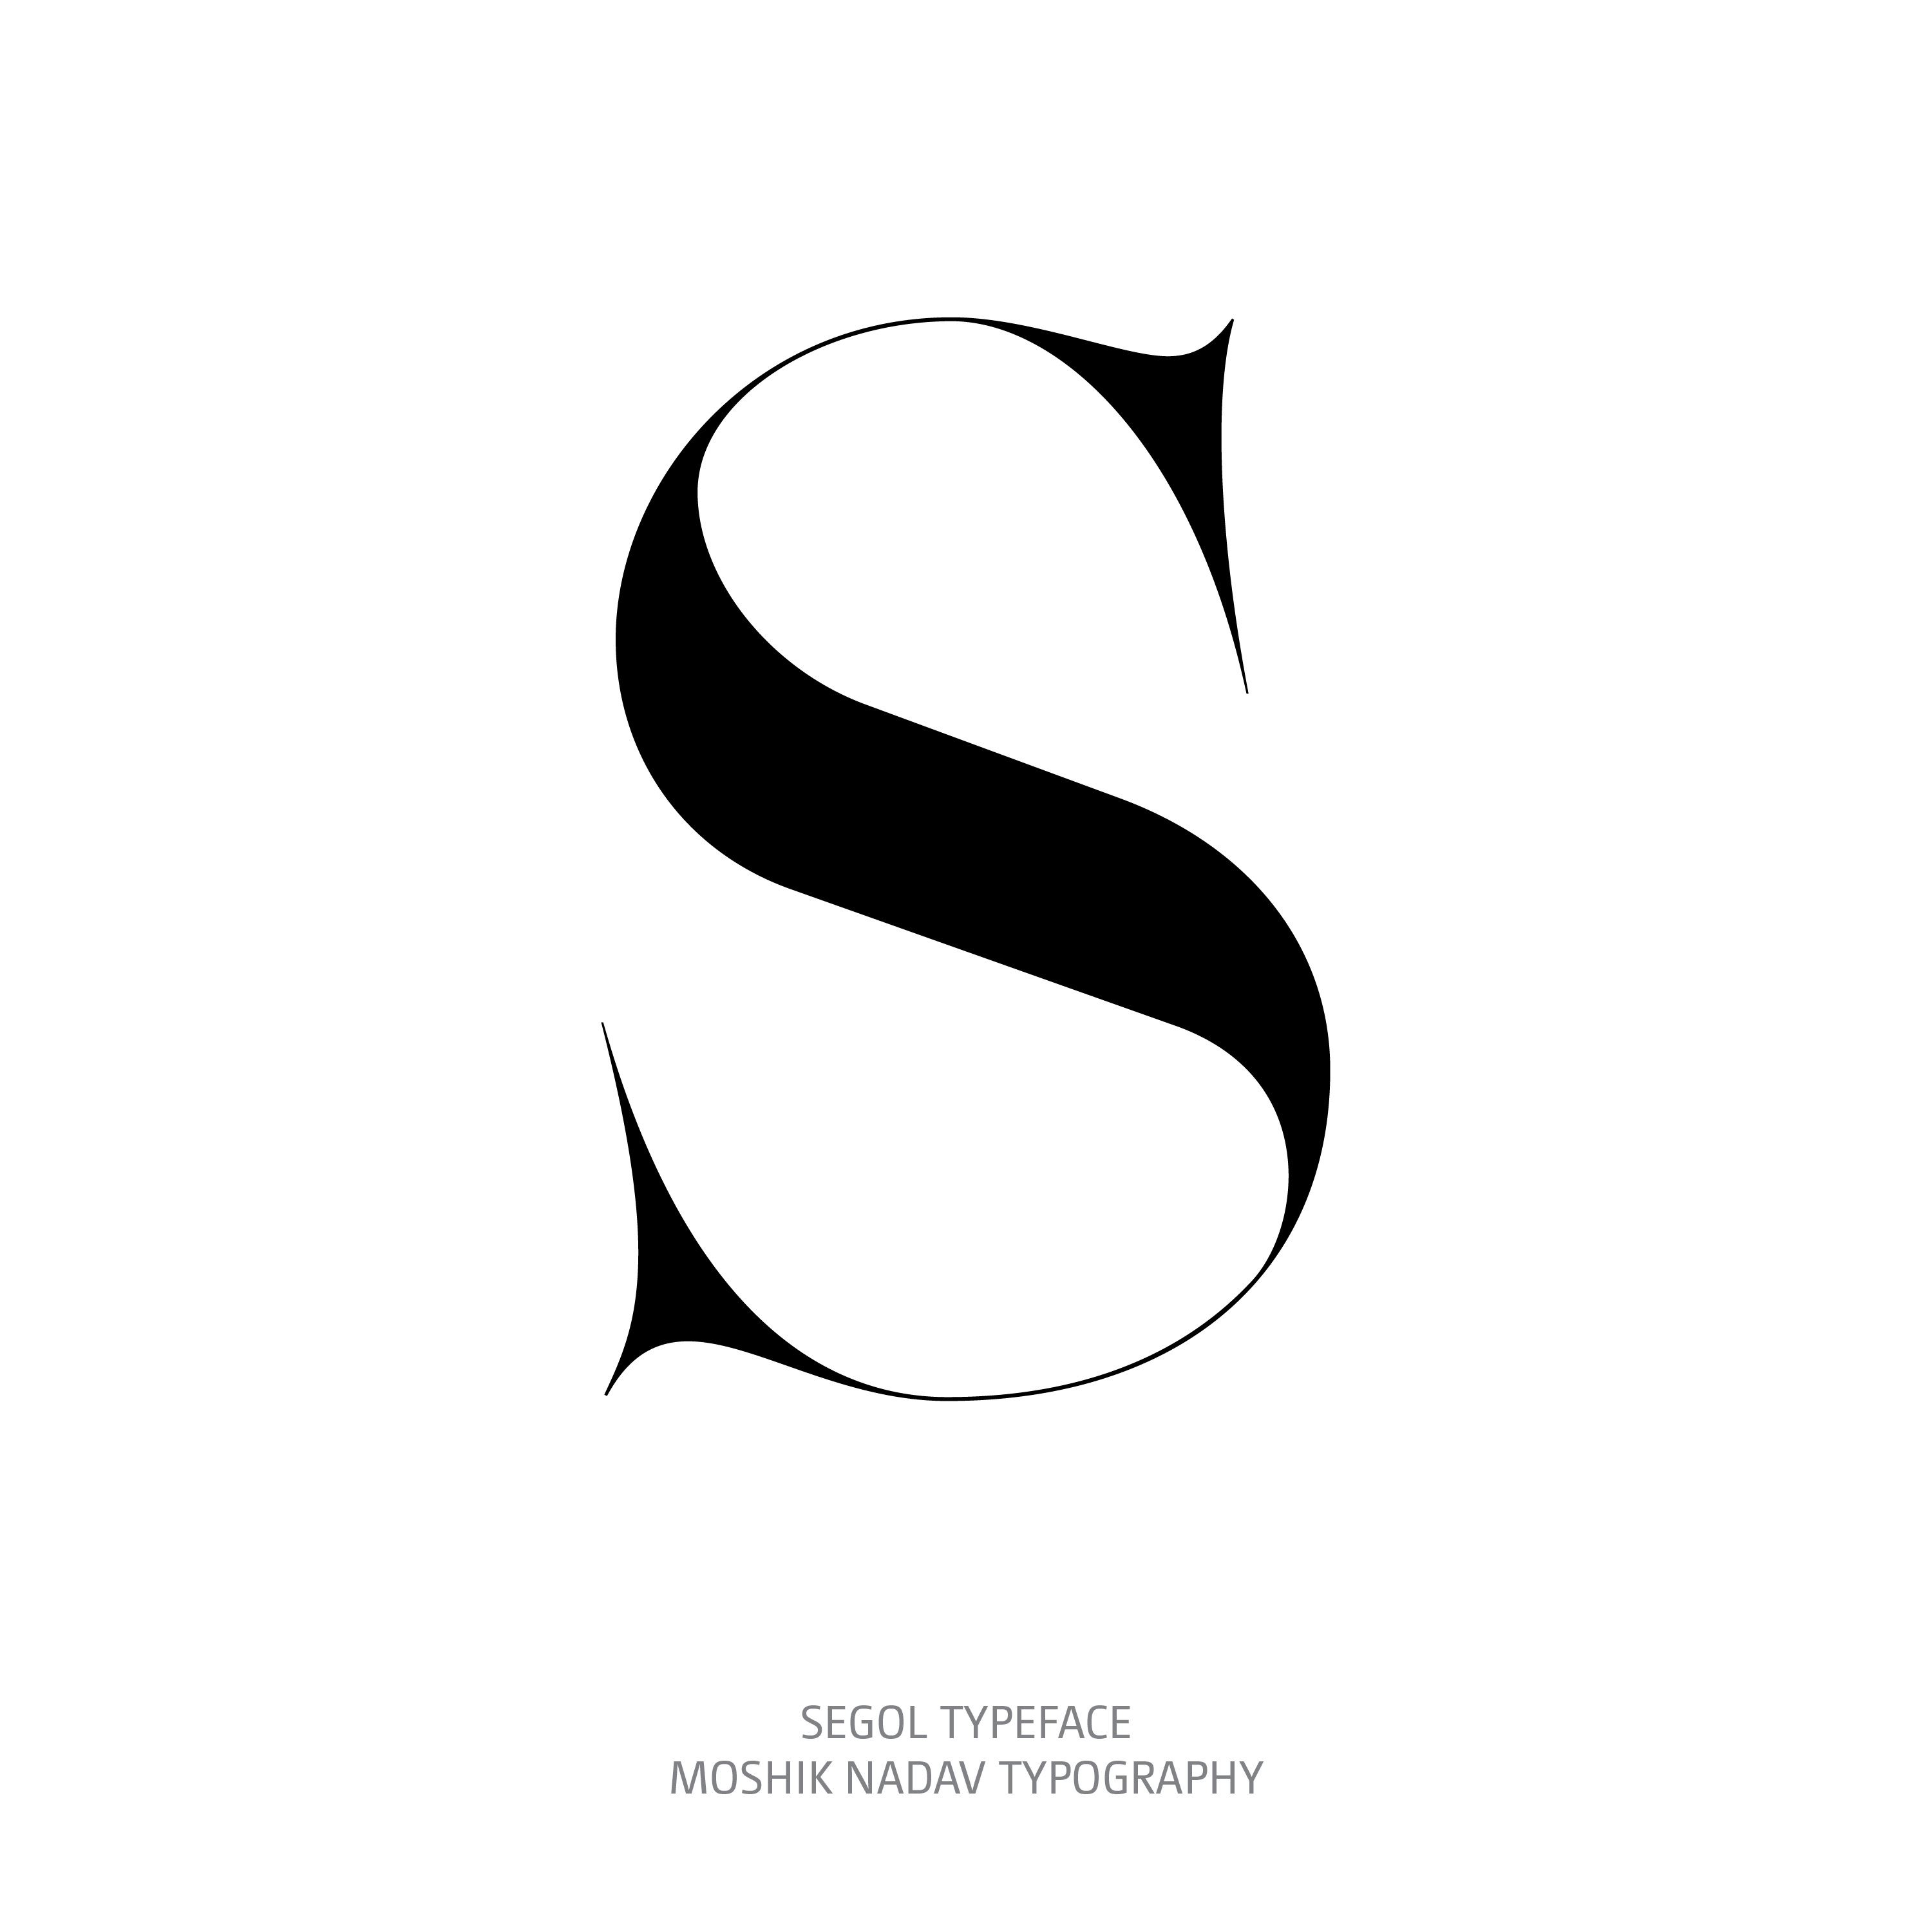 Segol Typeface S The Ultimate Font For Fashion Typography and sexy logos